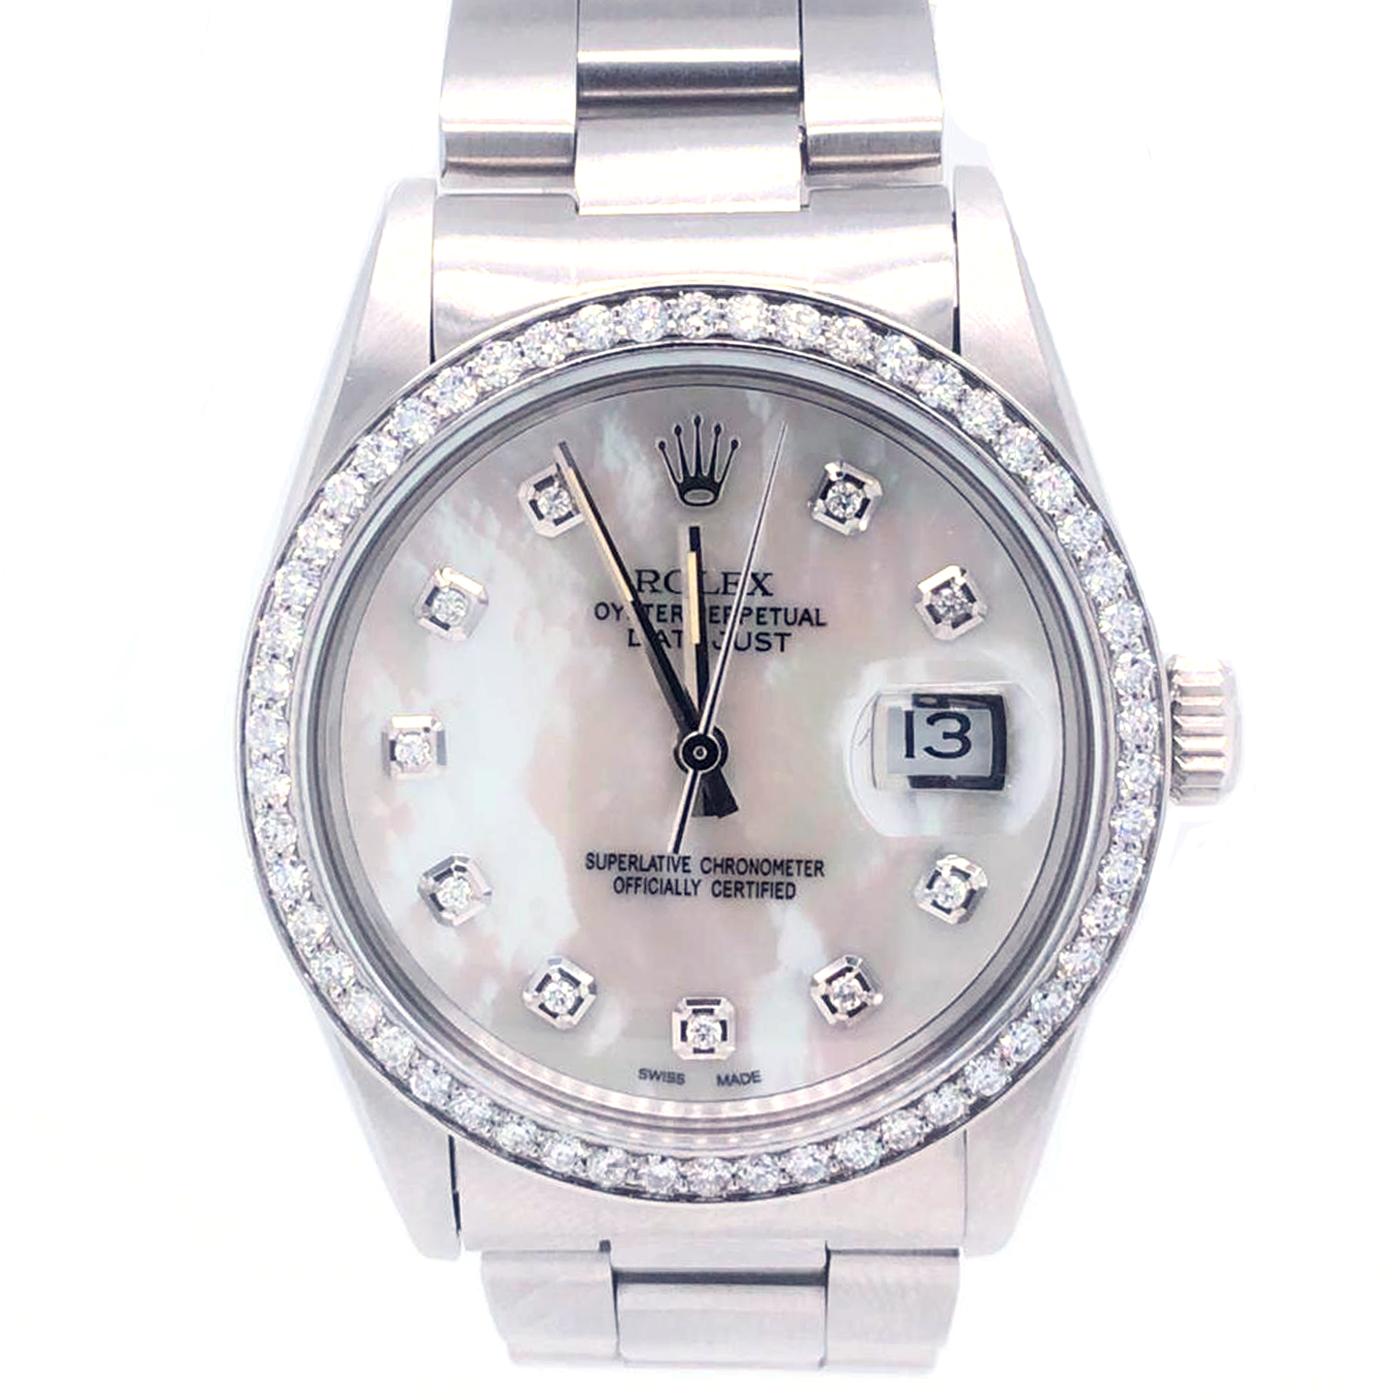 Rolex Datejust 16200 Men's 36mm Stainless Steel With Diamond Bezel and Mother of Pearl Diamond Face Watch

Rolex Datejust (16200) self-winding automatic watch, features a 36mm stainless steel case surrounding a rhodium dial on a stainless steel